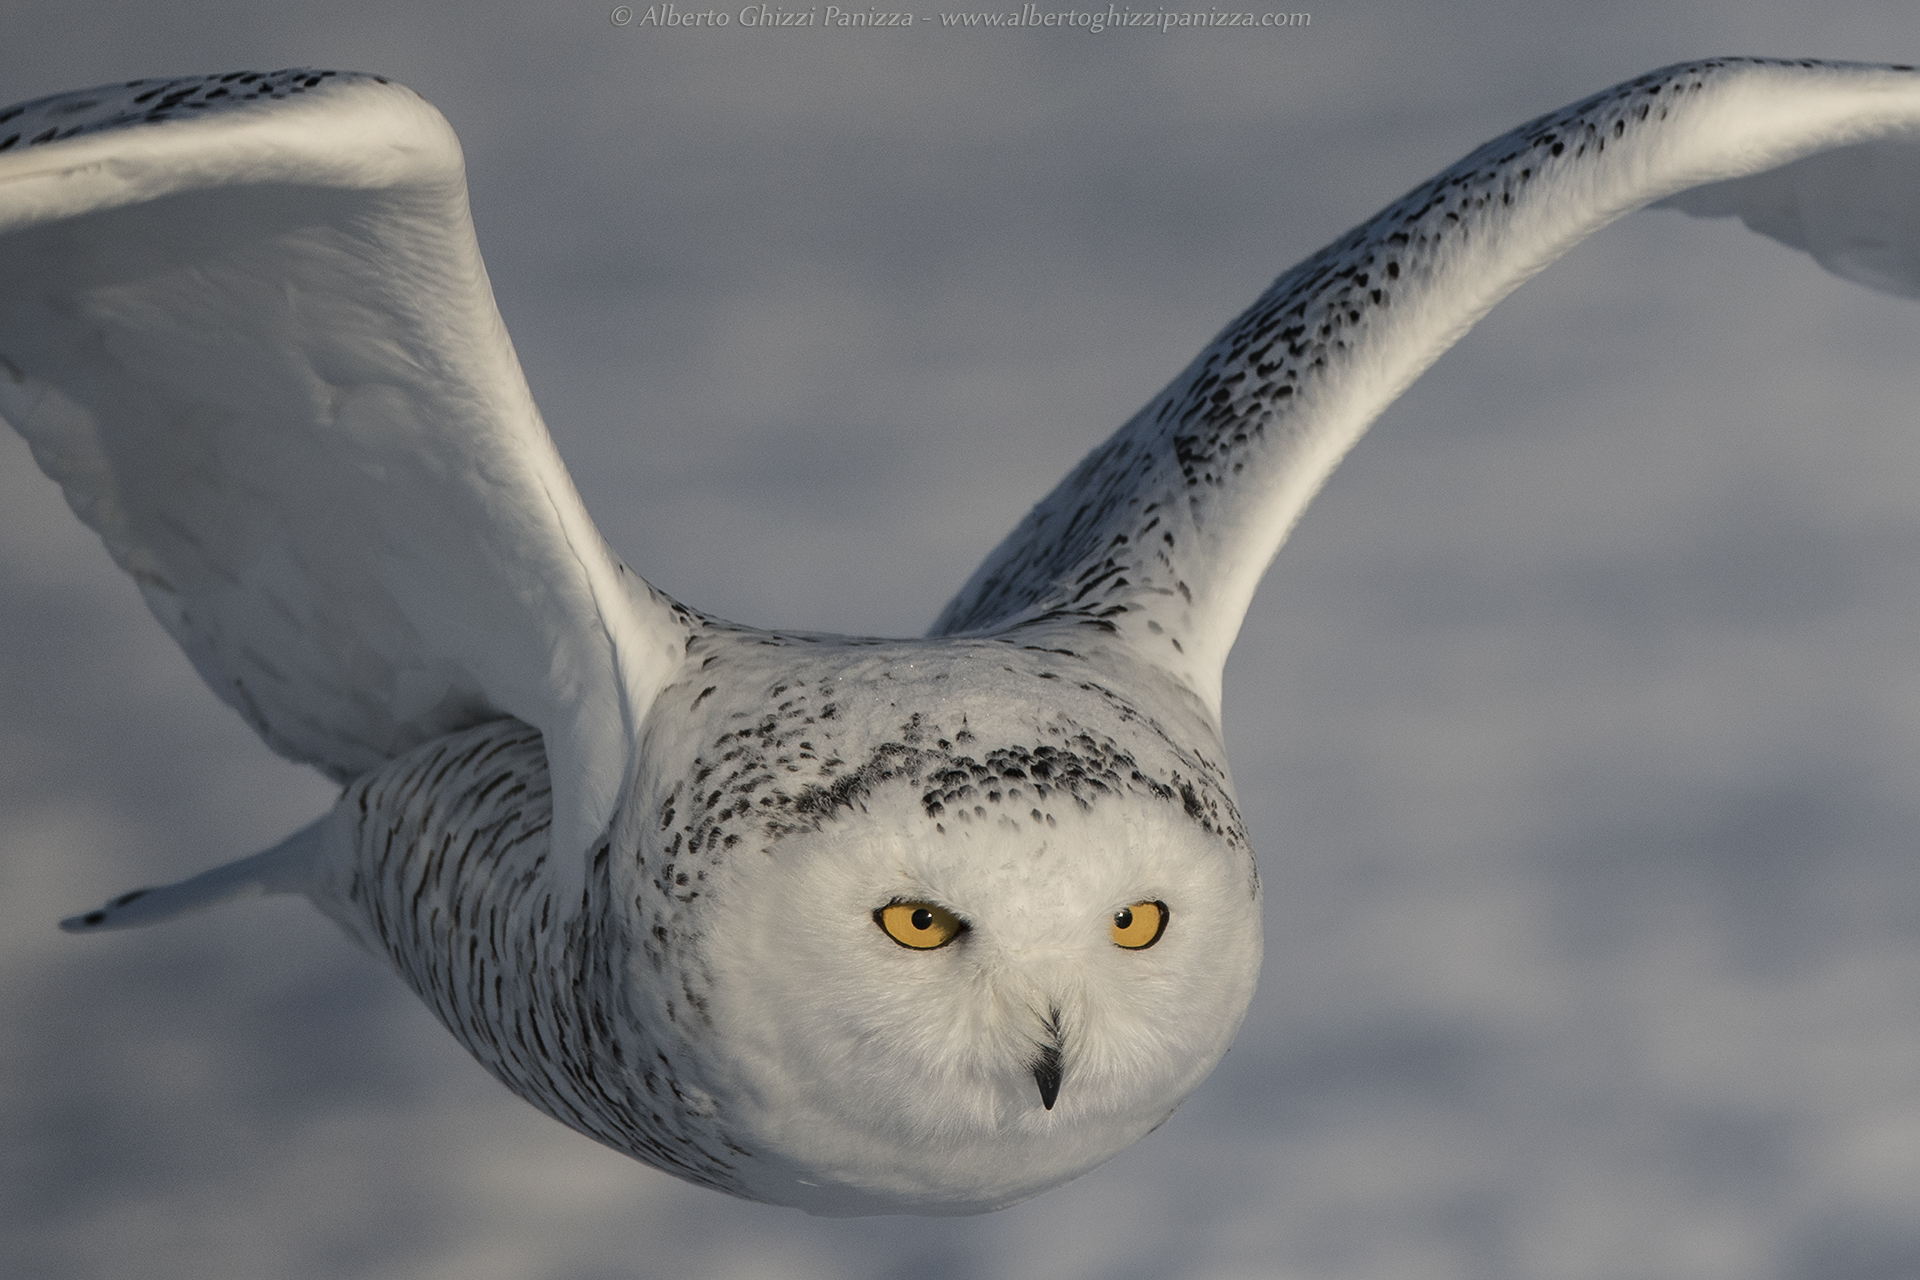 The eyes of the snowy owl...